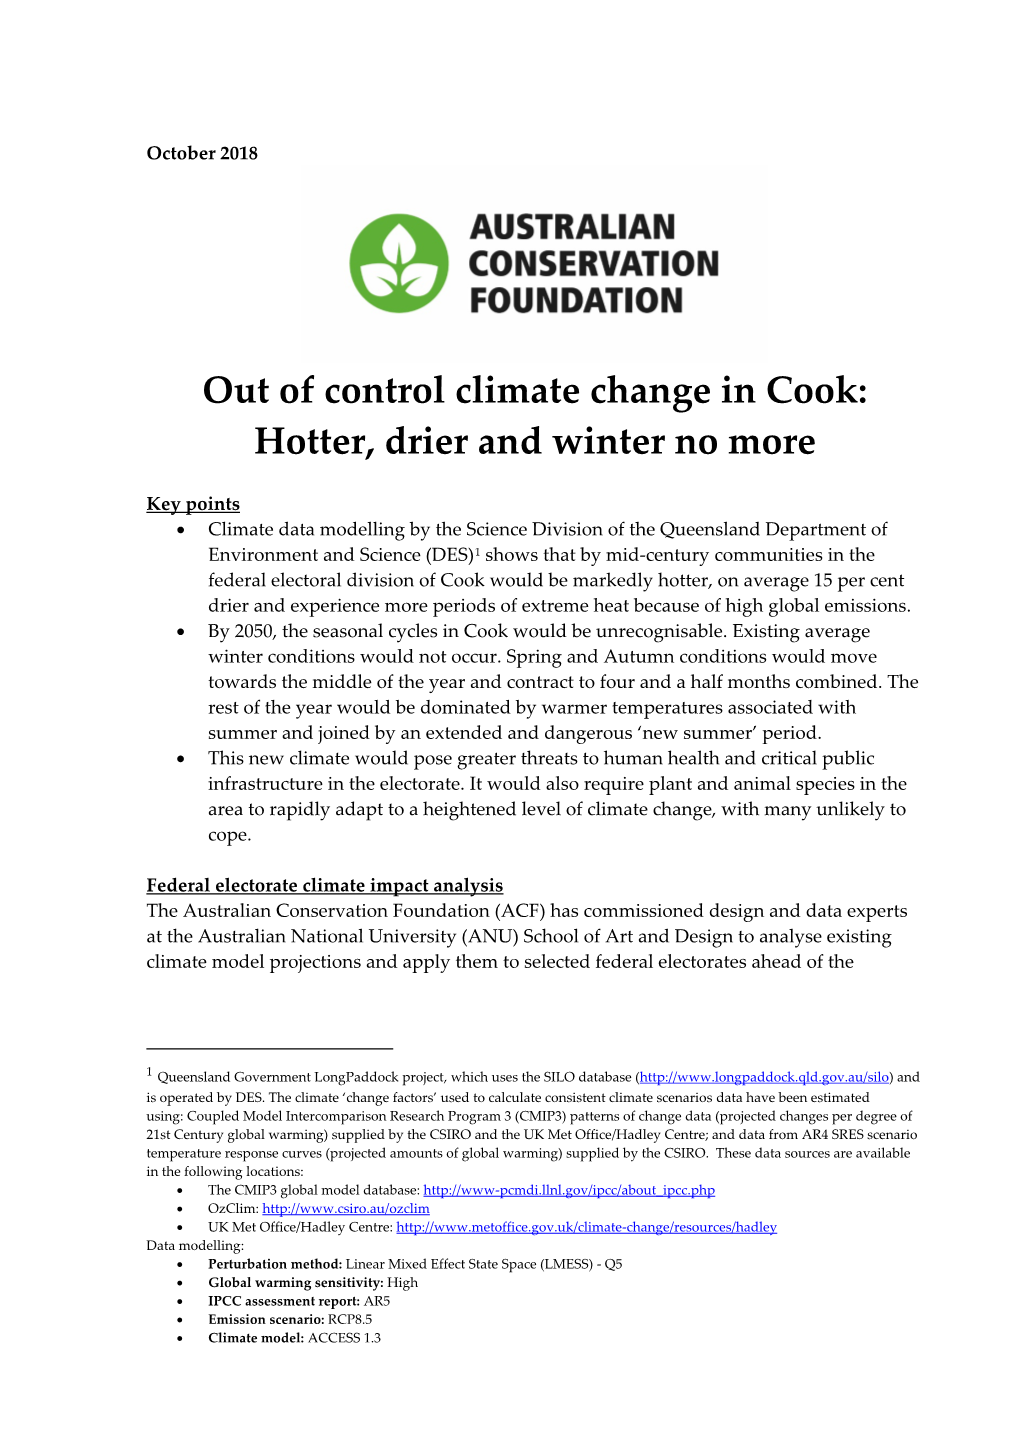 Out of Control Climate Change in Cook: Hotter, Drier and Winter No More